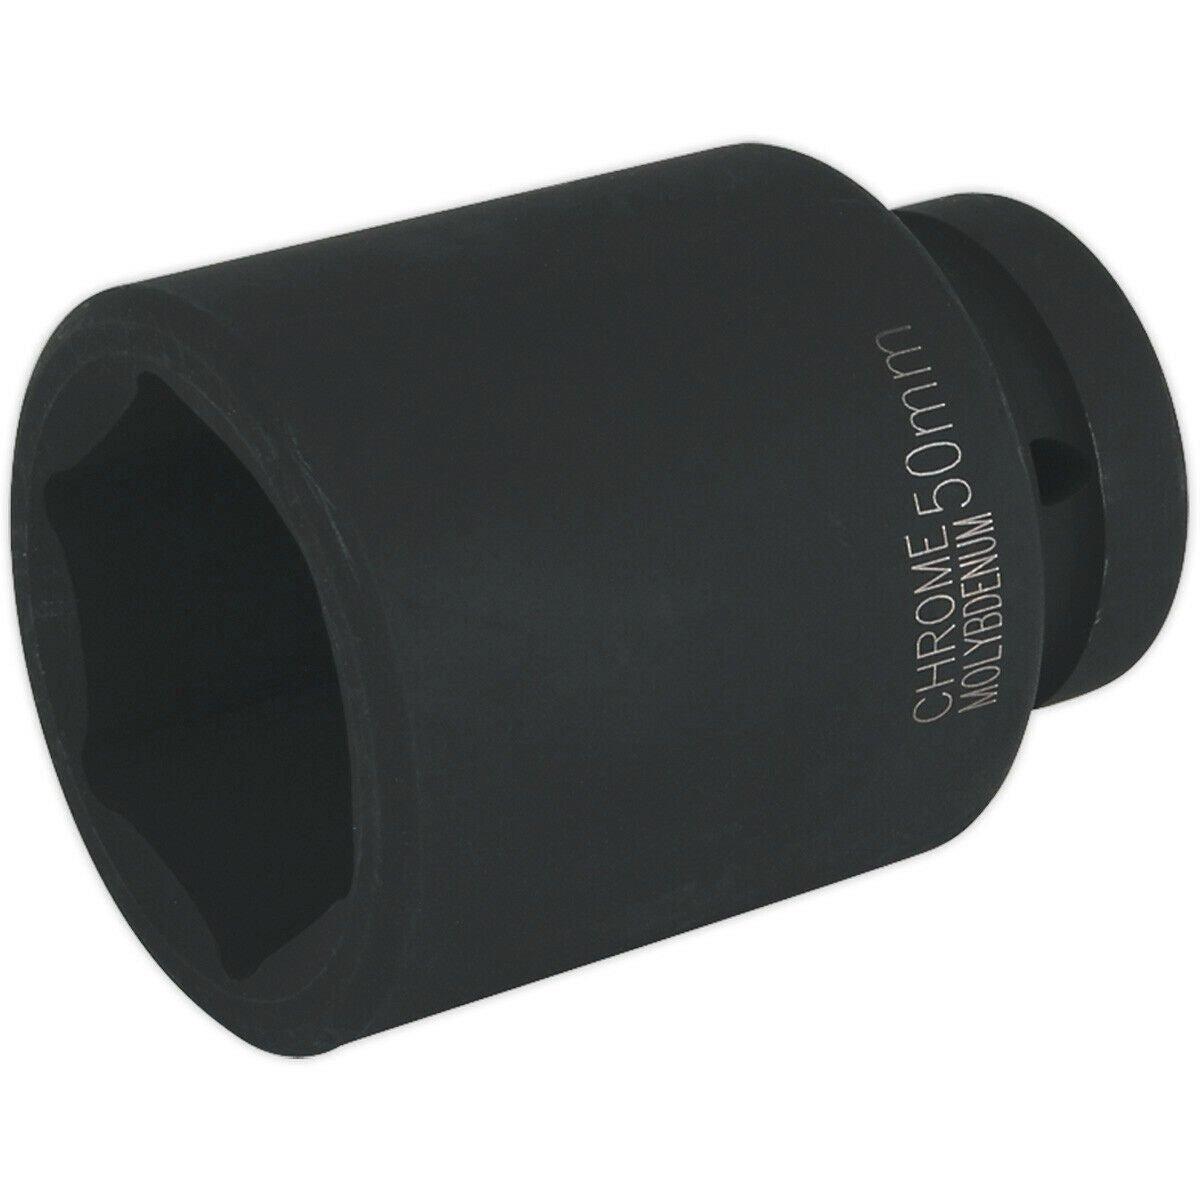 50mm Forged Deep Impact Socket - 1 Inch Sq Drive - Chromoly Wrench Socket